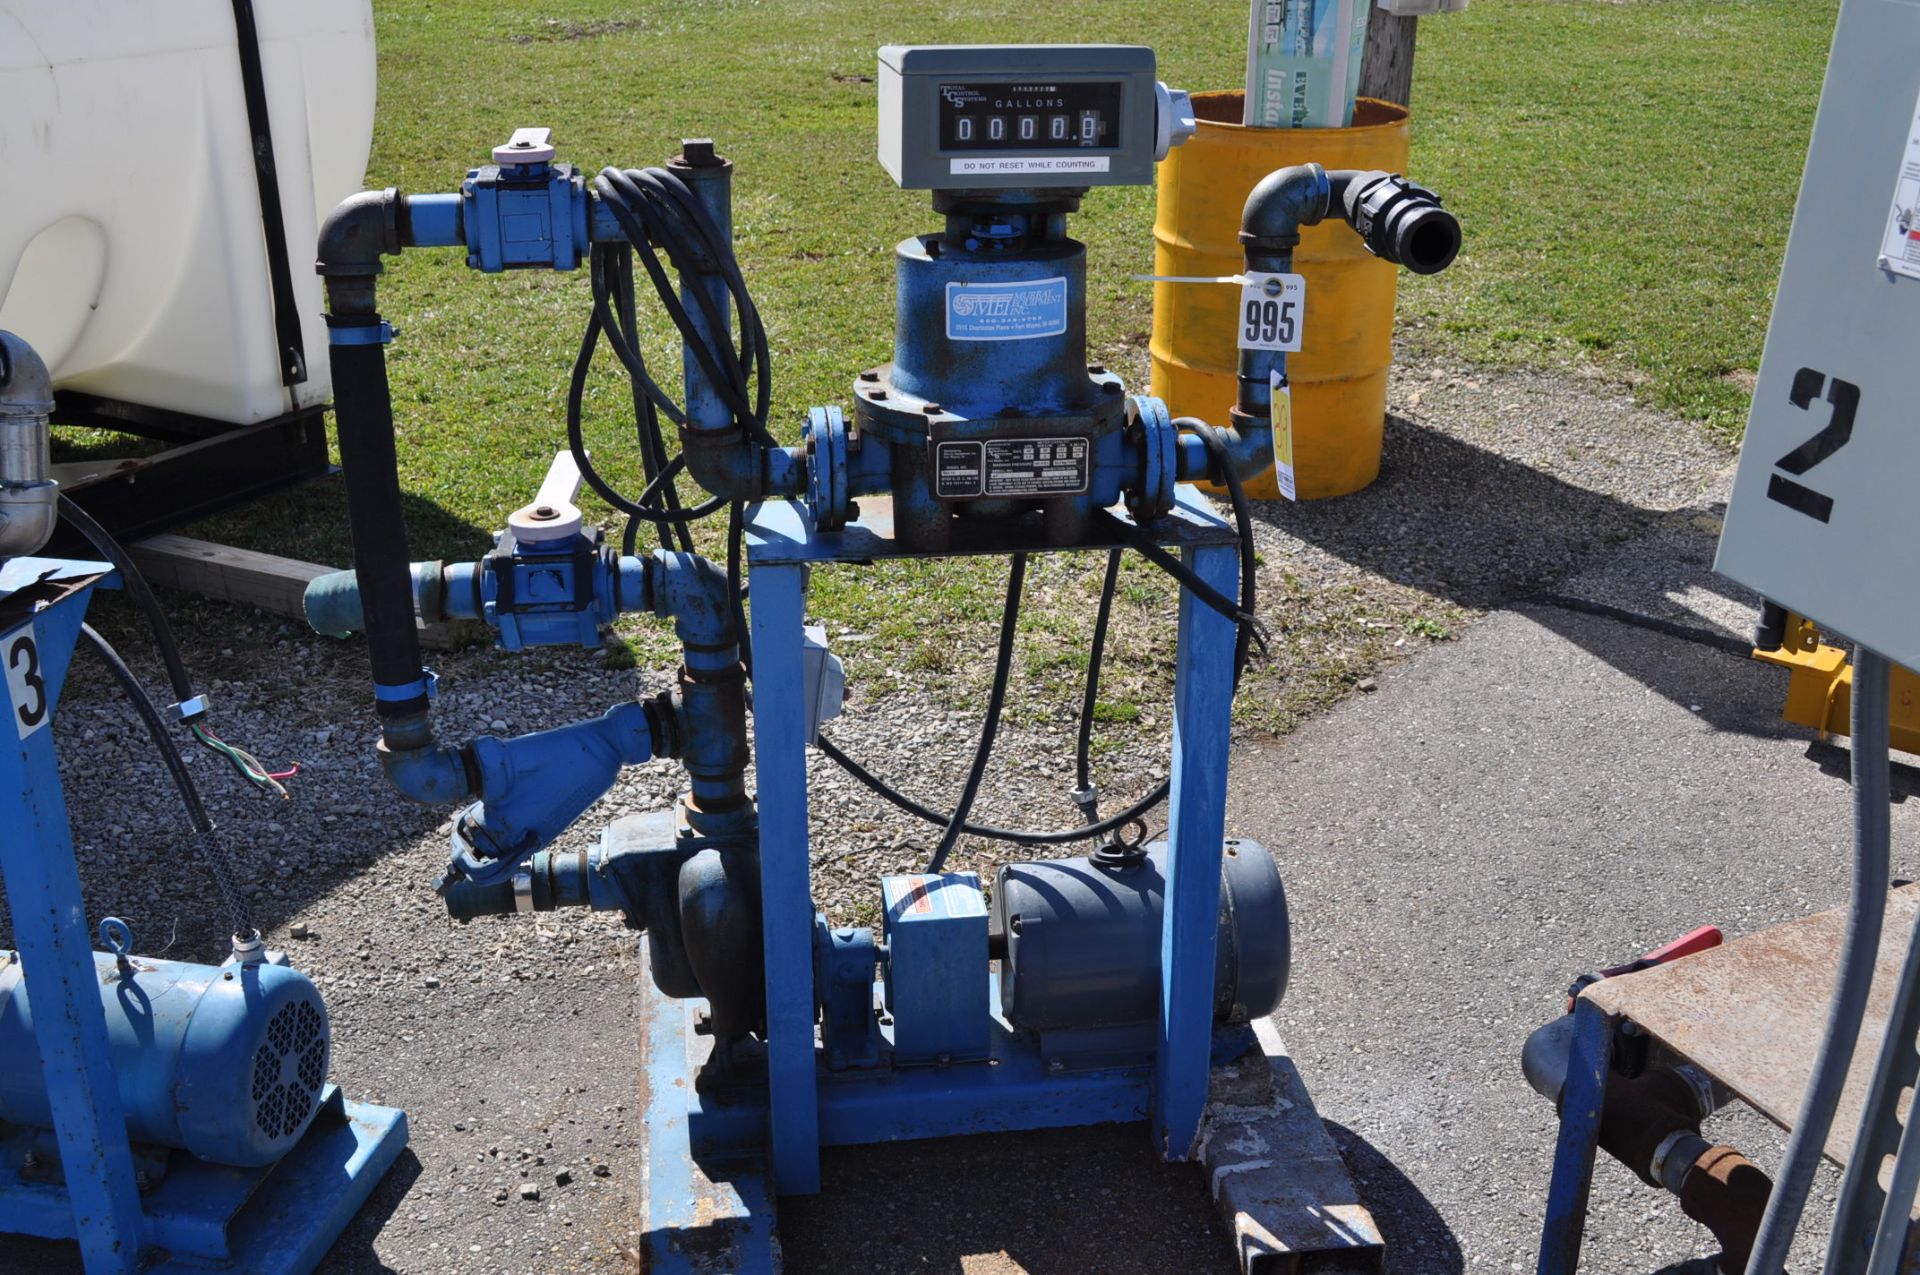 Electric drive chemical transfer pump, 5 hp single phase, with meter - Image 2 of 2